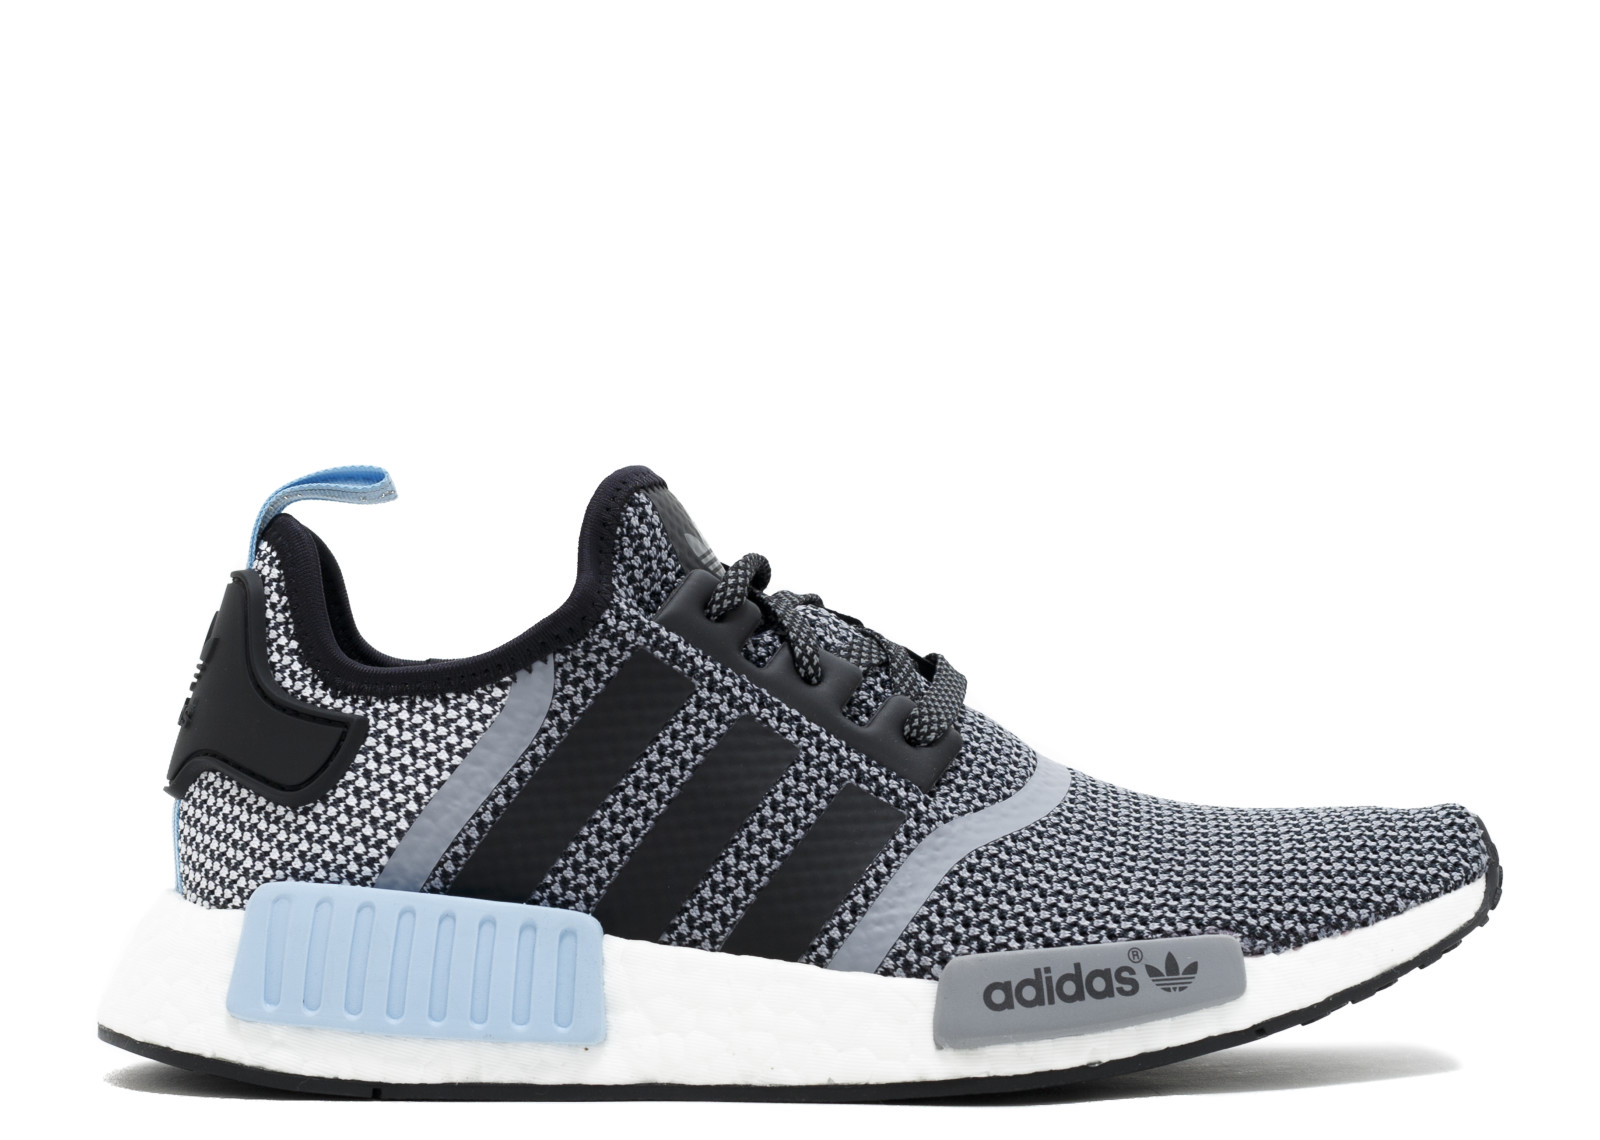 Adidas NMD R1 CLEAR BLUE — the curated 